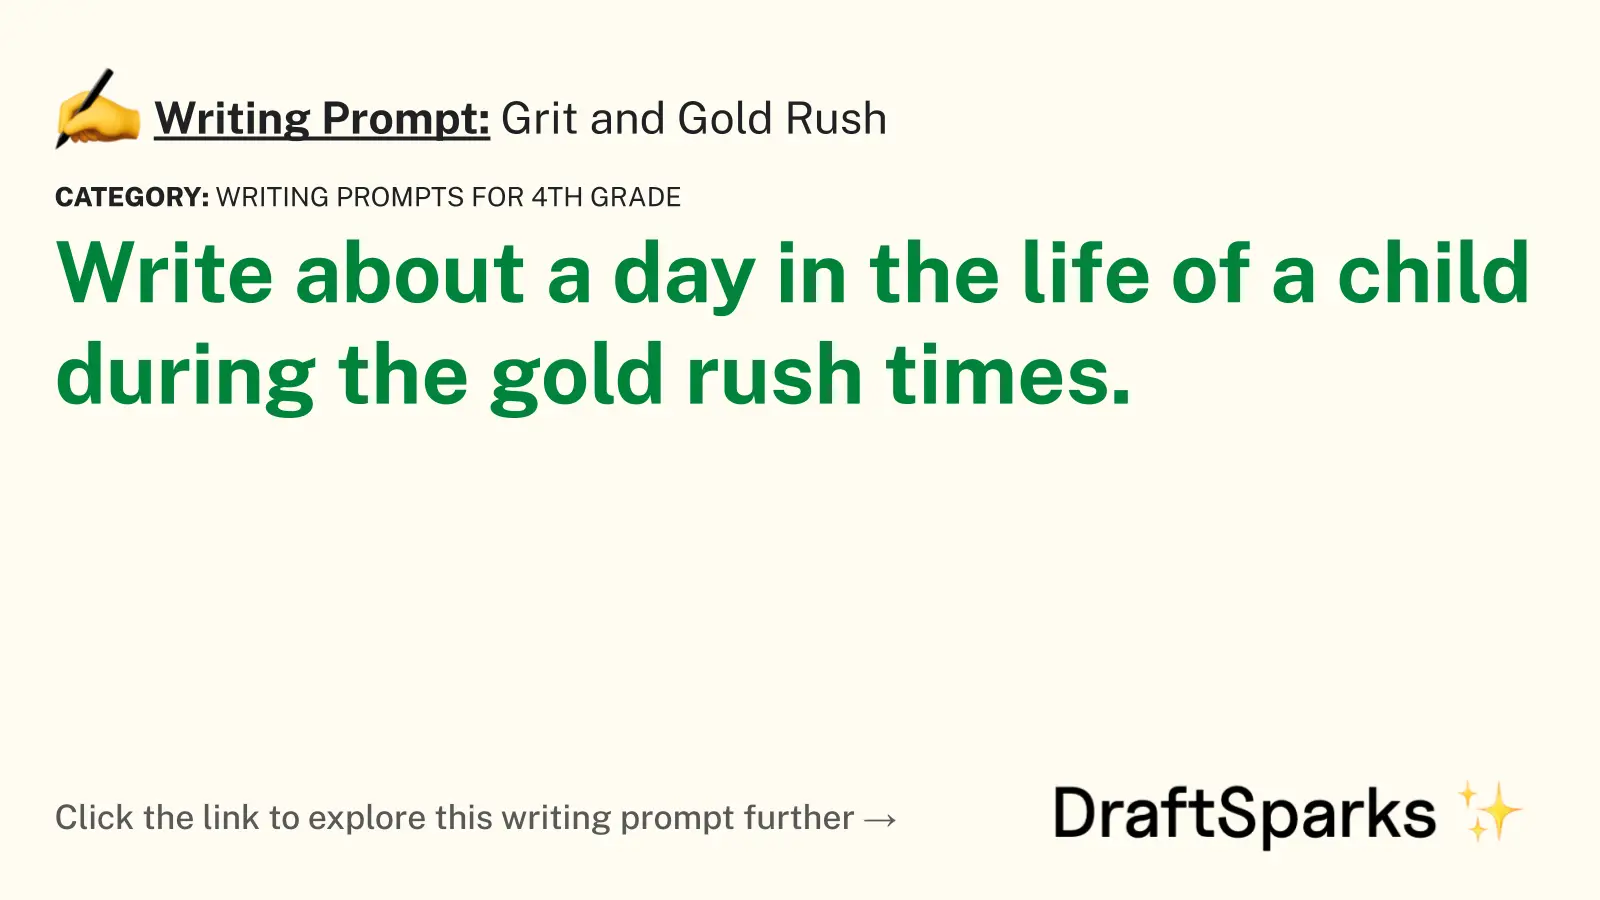 Grit and Gold Rush